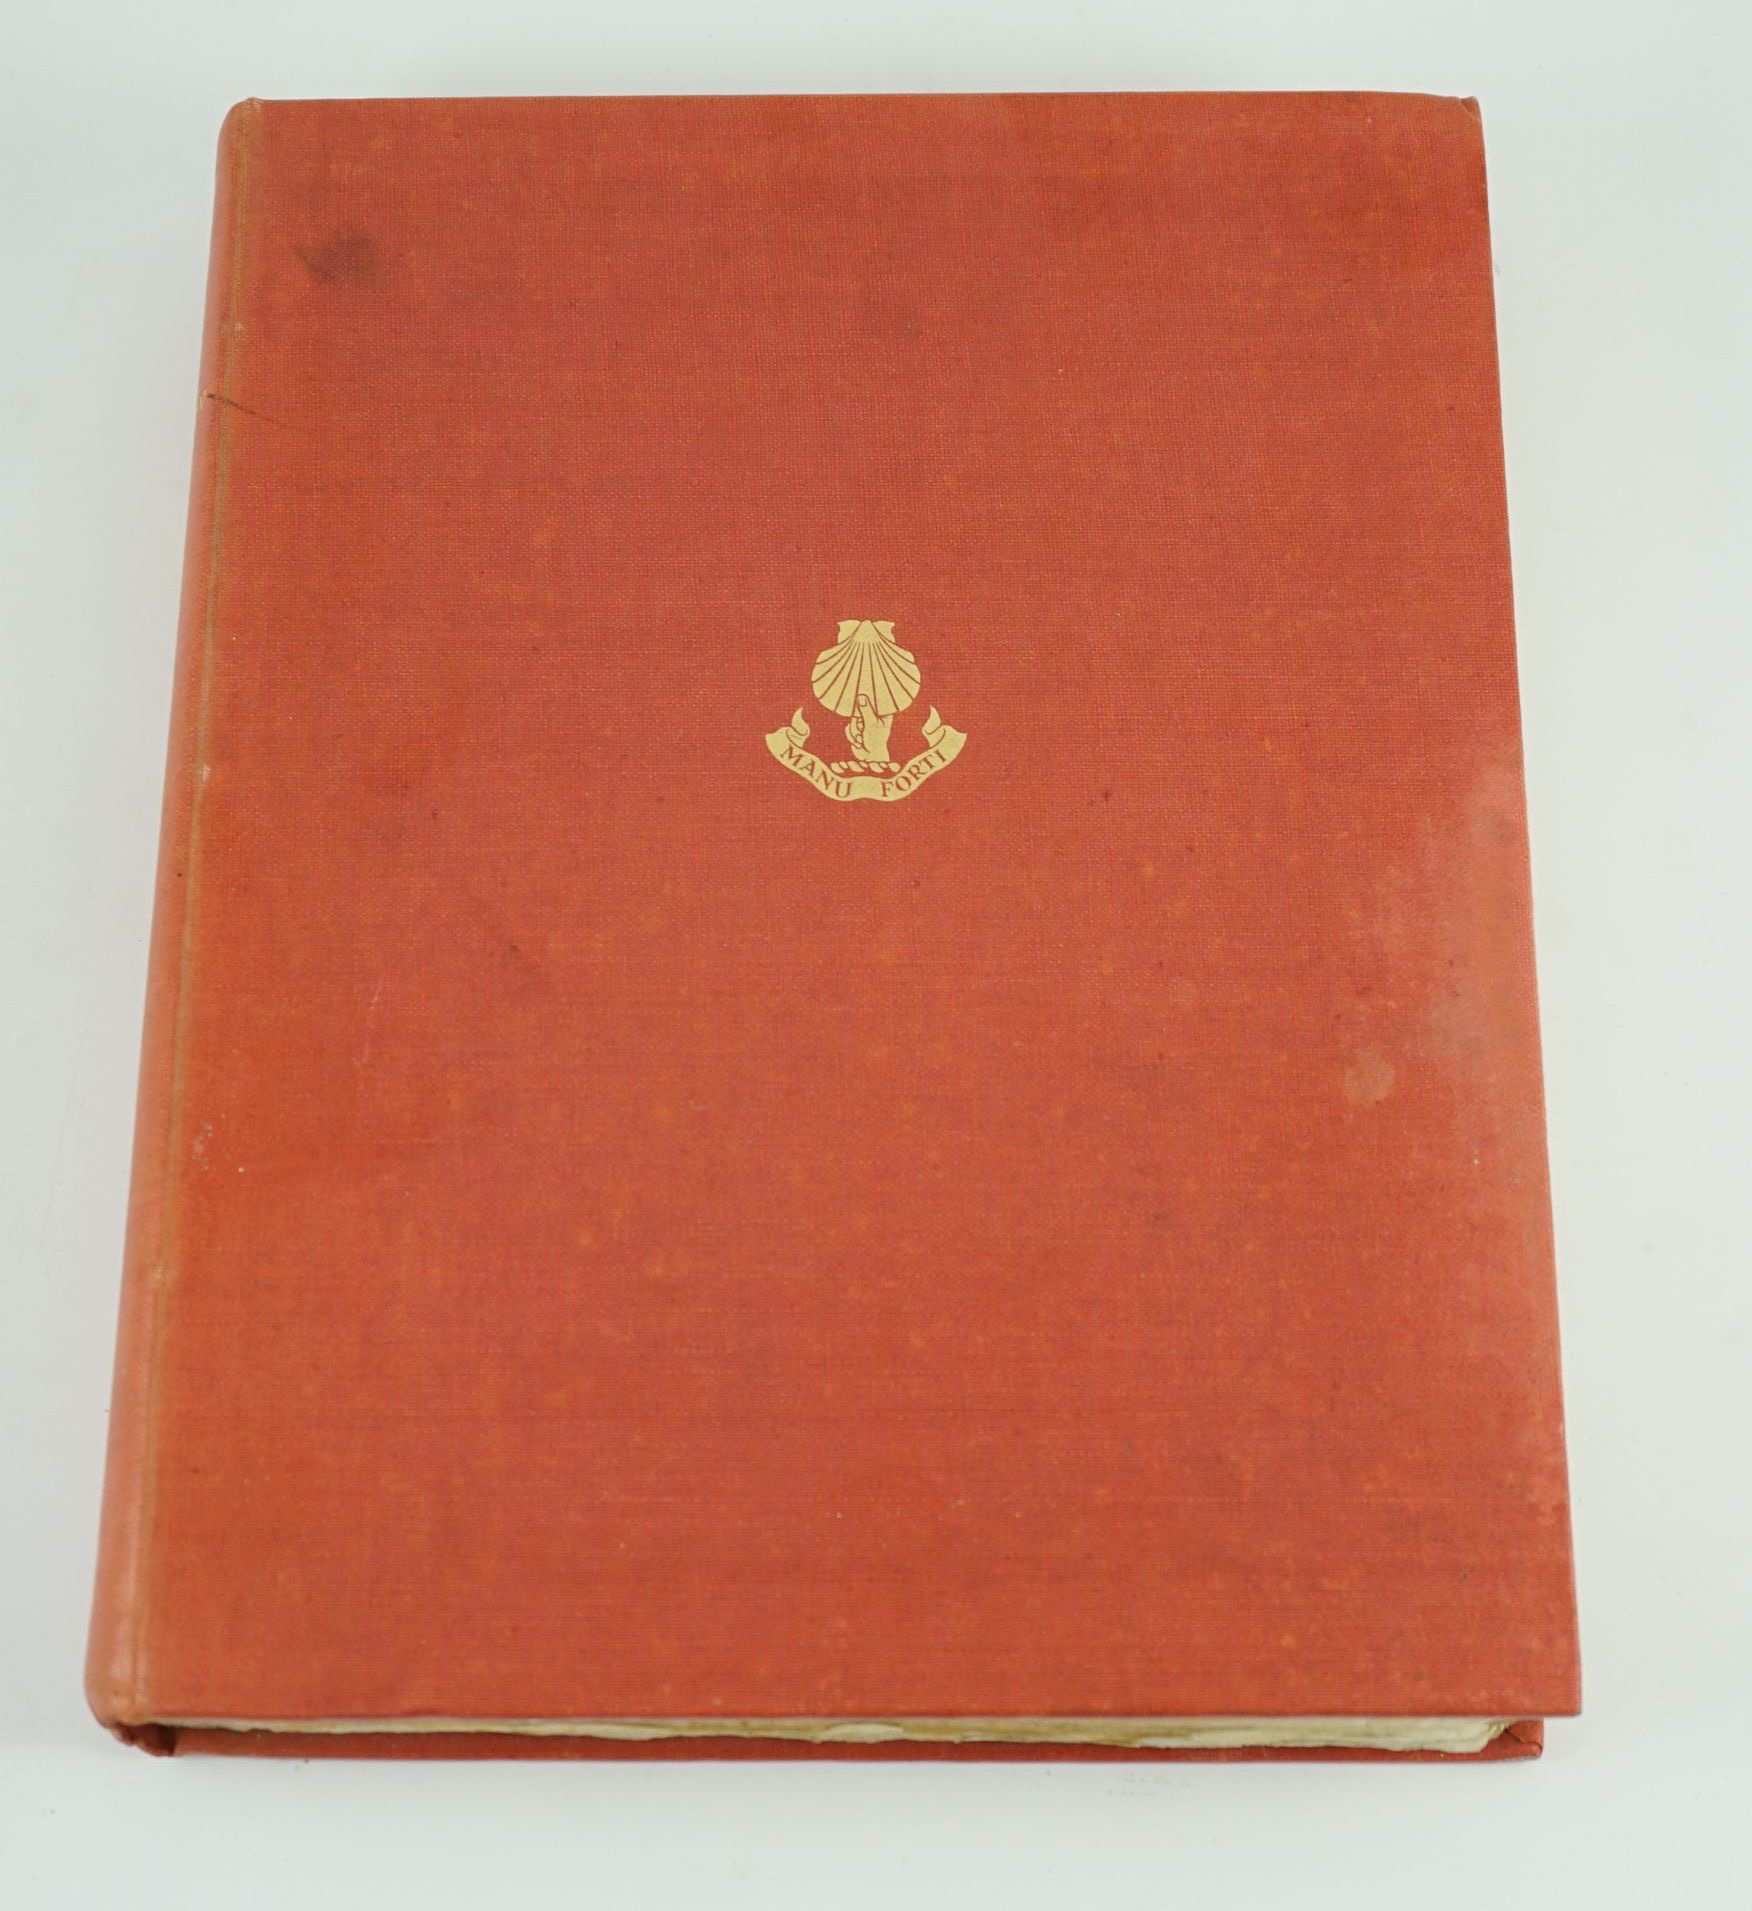 Hobson, Robert Lockhart - Catalogue of the Leonard Gow Collection of Chinese Porcelain, one of 300 signed by Leonard Gow, 4to, original red cloth, with 85 plates, mostly in colour, George W. Jones, London, 1931          